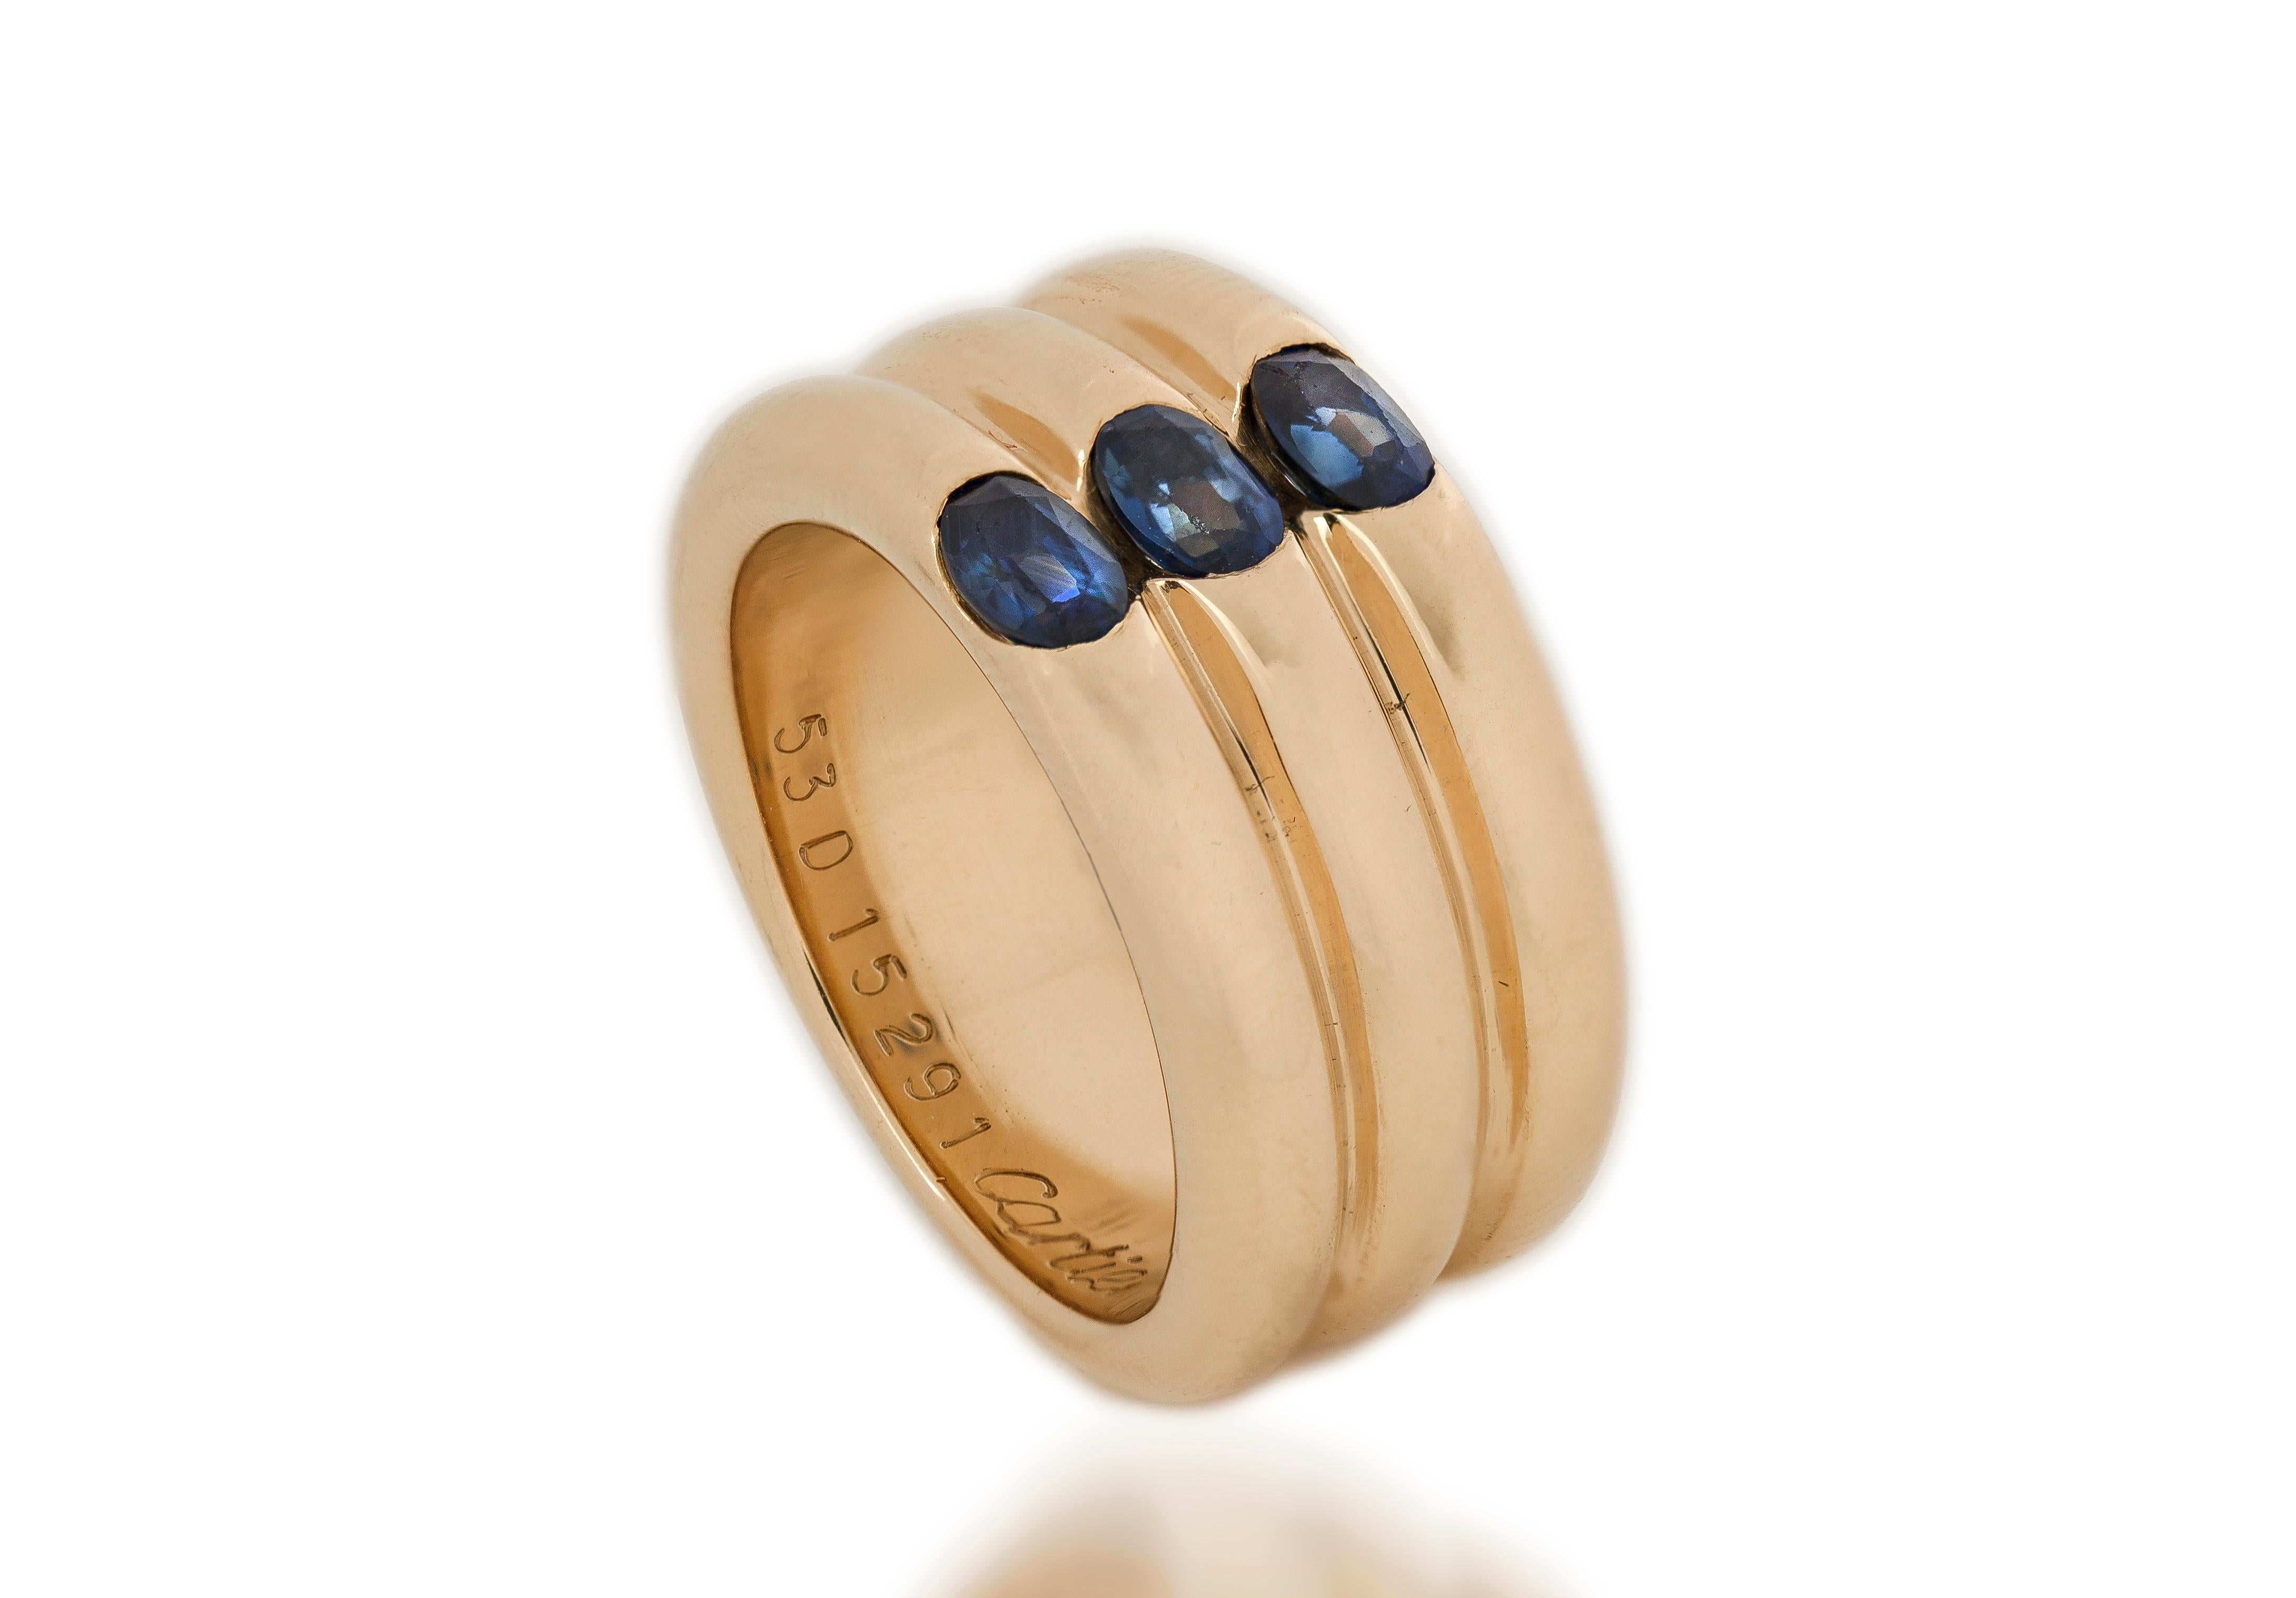 Cartier 18kt yellow gold triple ring band with blue sapphires.
Made in France, Paris 1995
Fully hallmarked and signed Cartier and serial number.

Dimension -
Diameter x Width : 2.3 x 1 cm
Finger Size : (UK) = N (US) = 7 (EU) = 53
Weight : 19